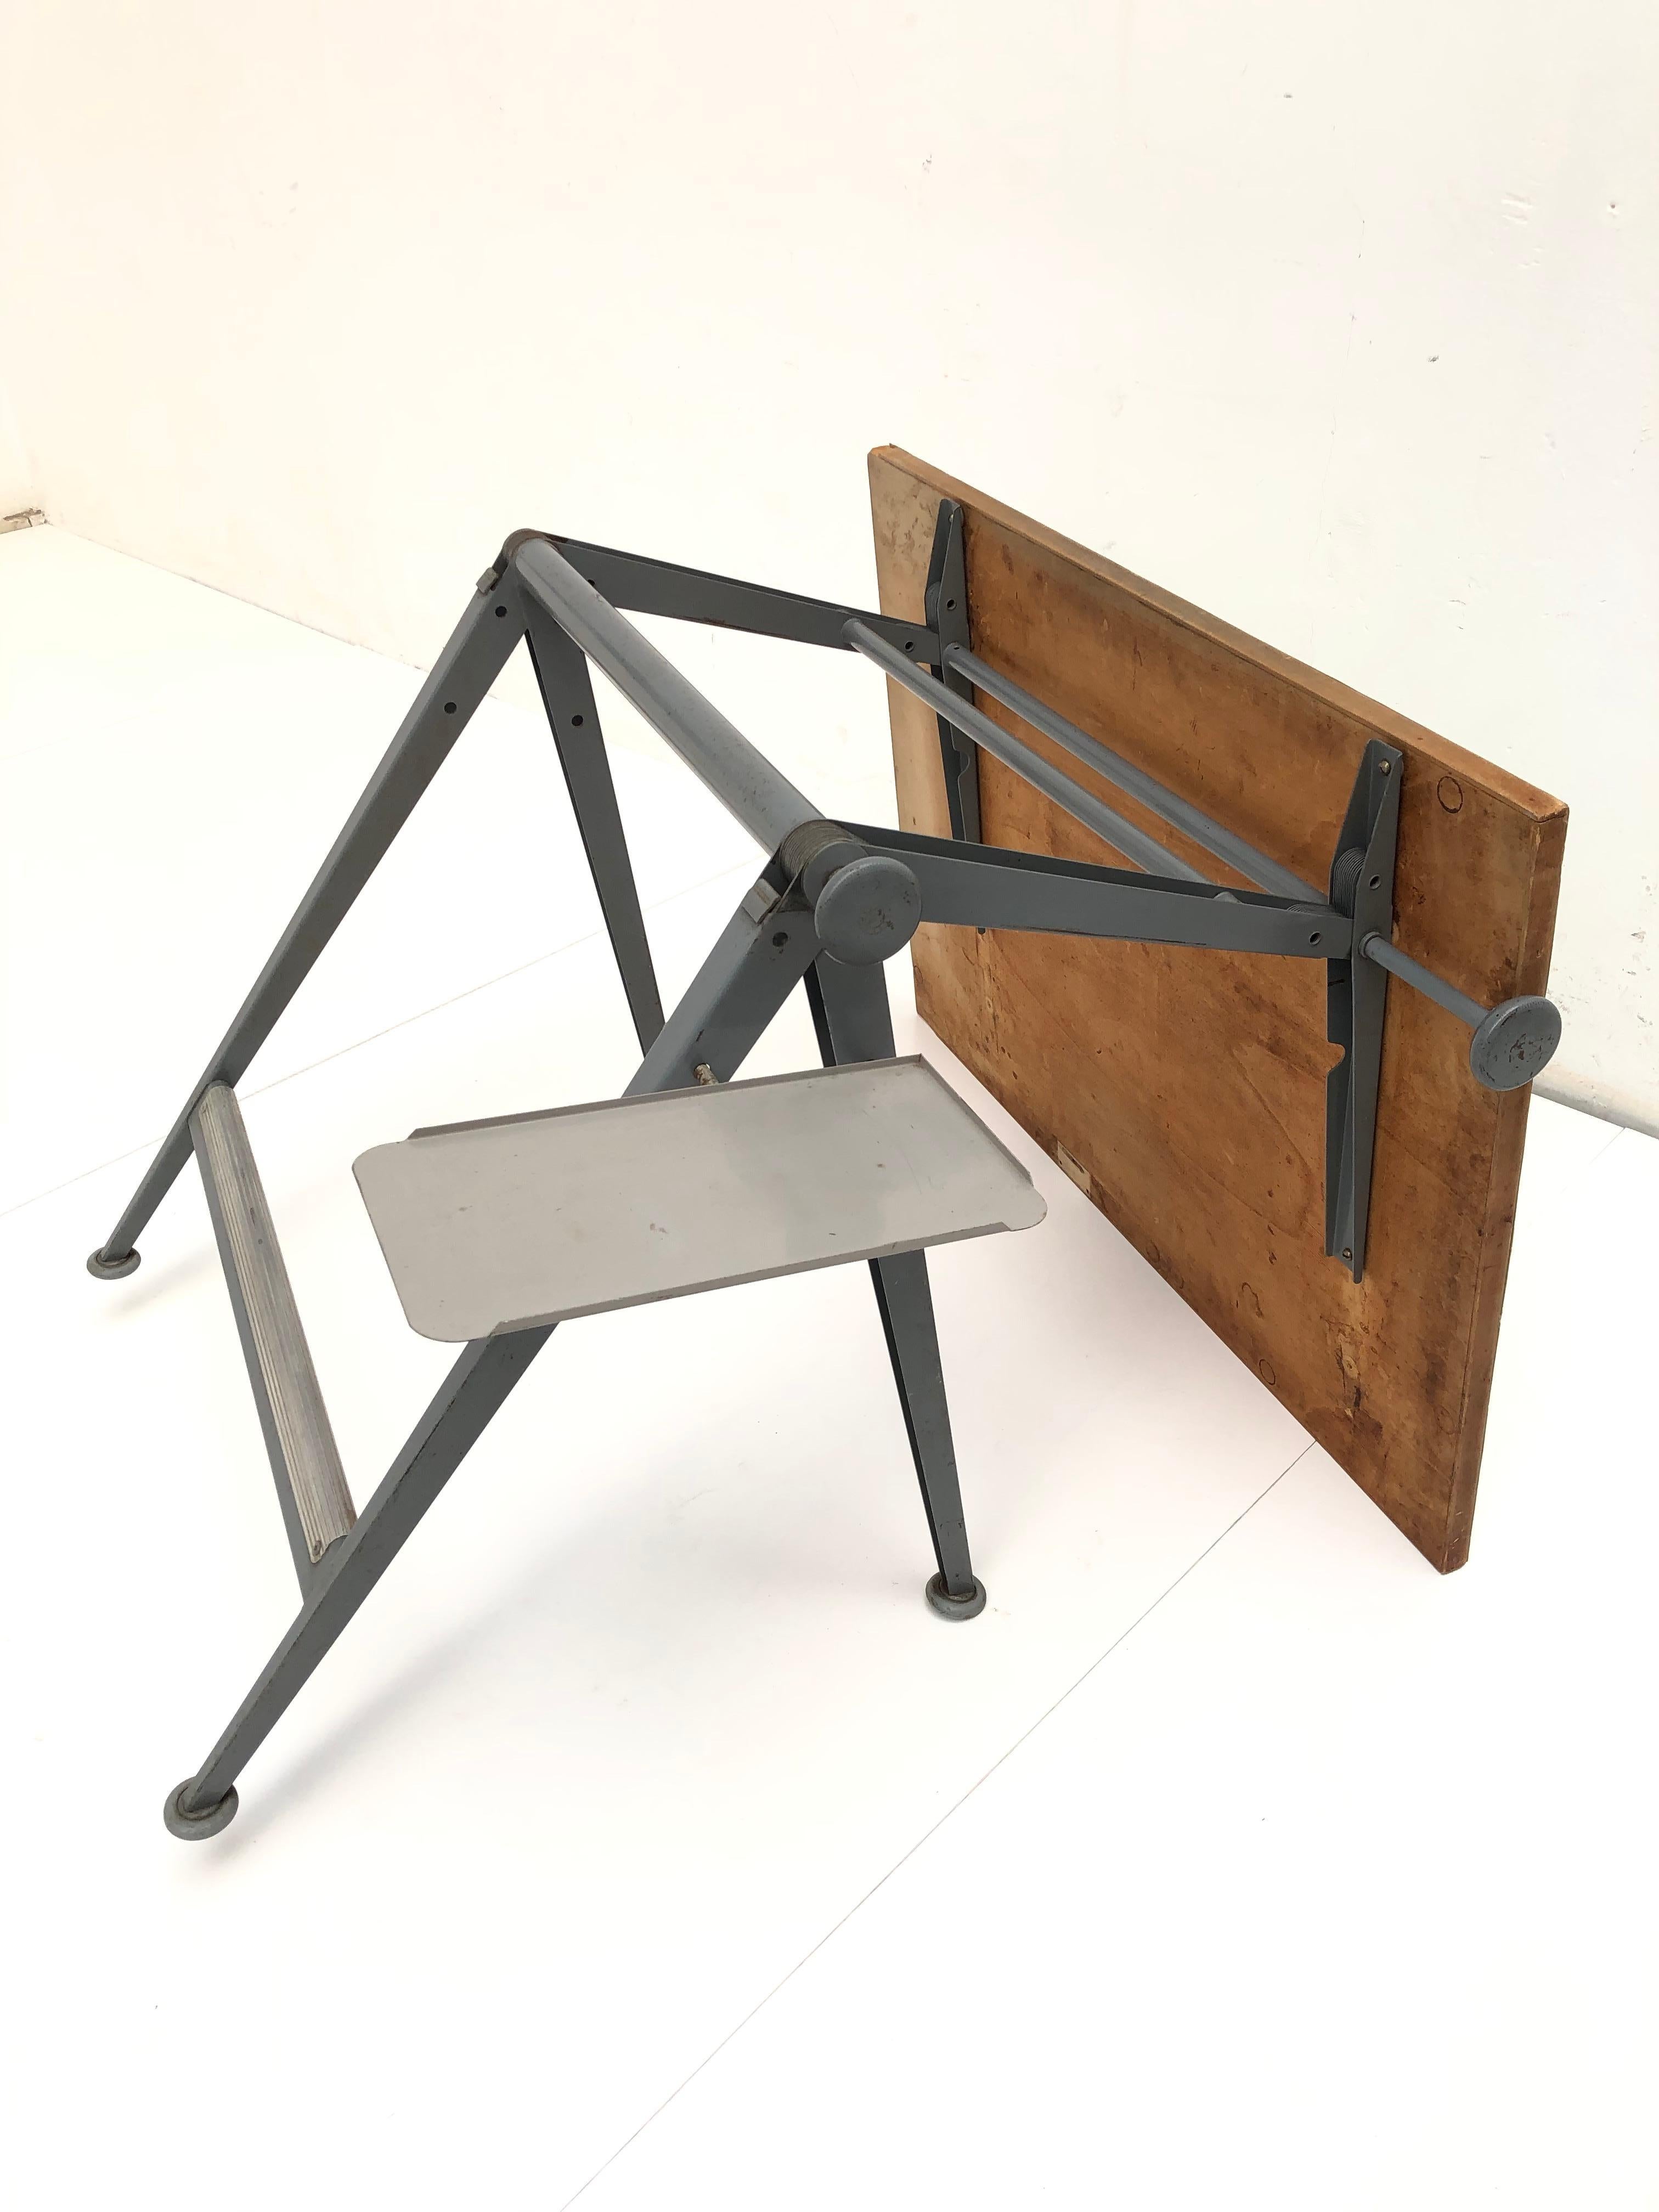 Steel Wim Rietveld and Friso Kramer Reply Drafting Table 1959 Ahrend the Netherlands